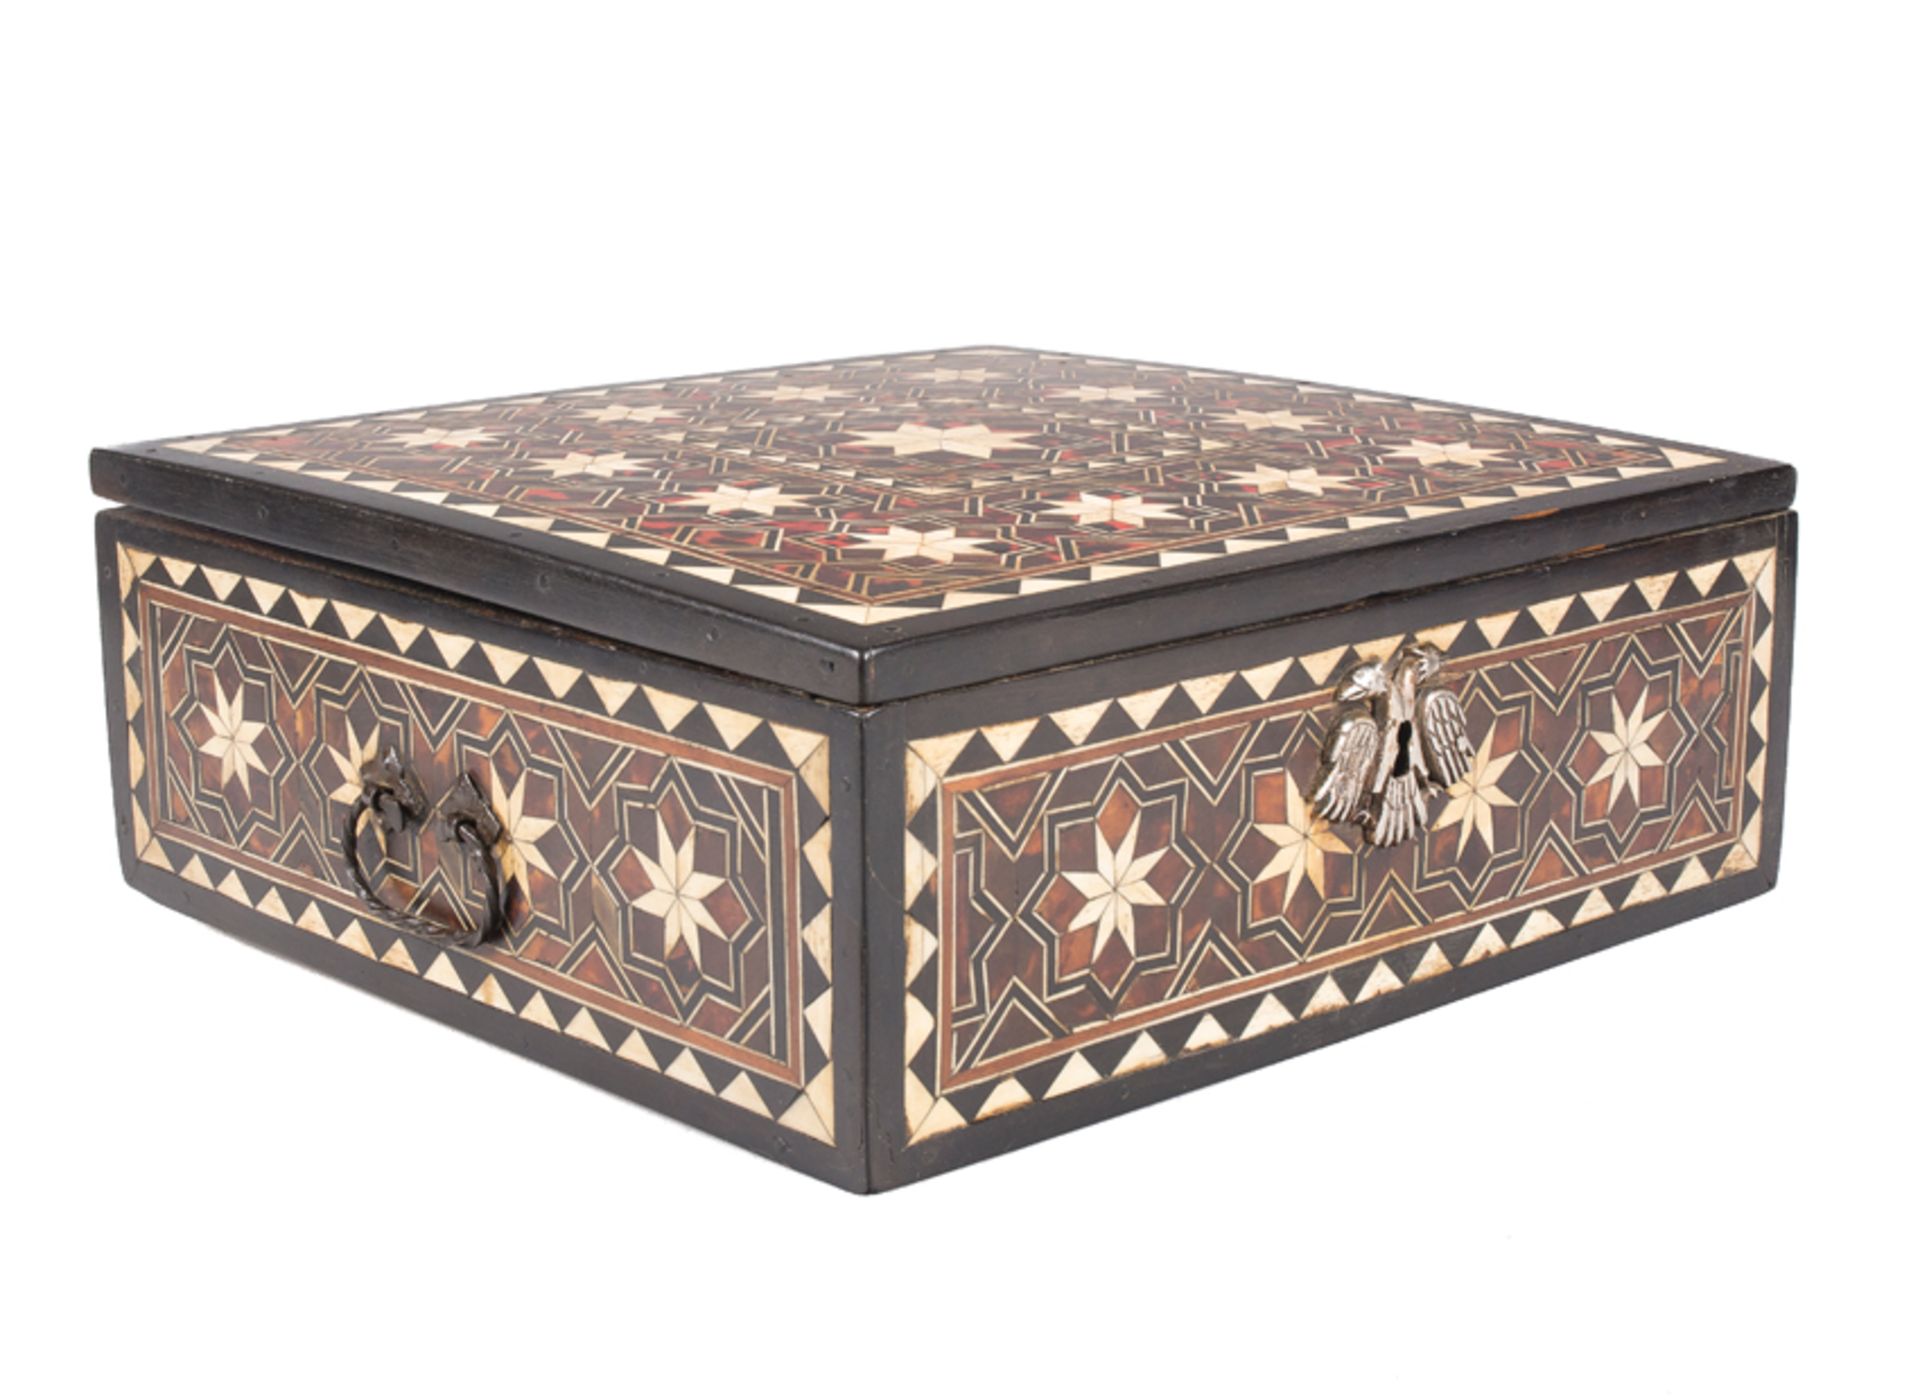 Cedarwood box covered in tortoiseshell, bone and ebony plaques. Colonial workshop. Mexico. 18th cen